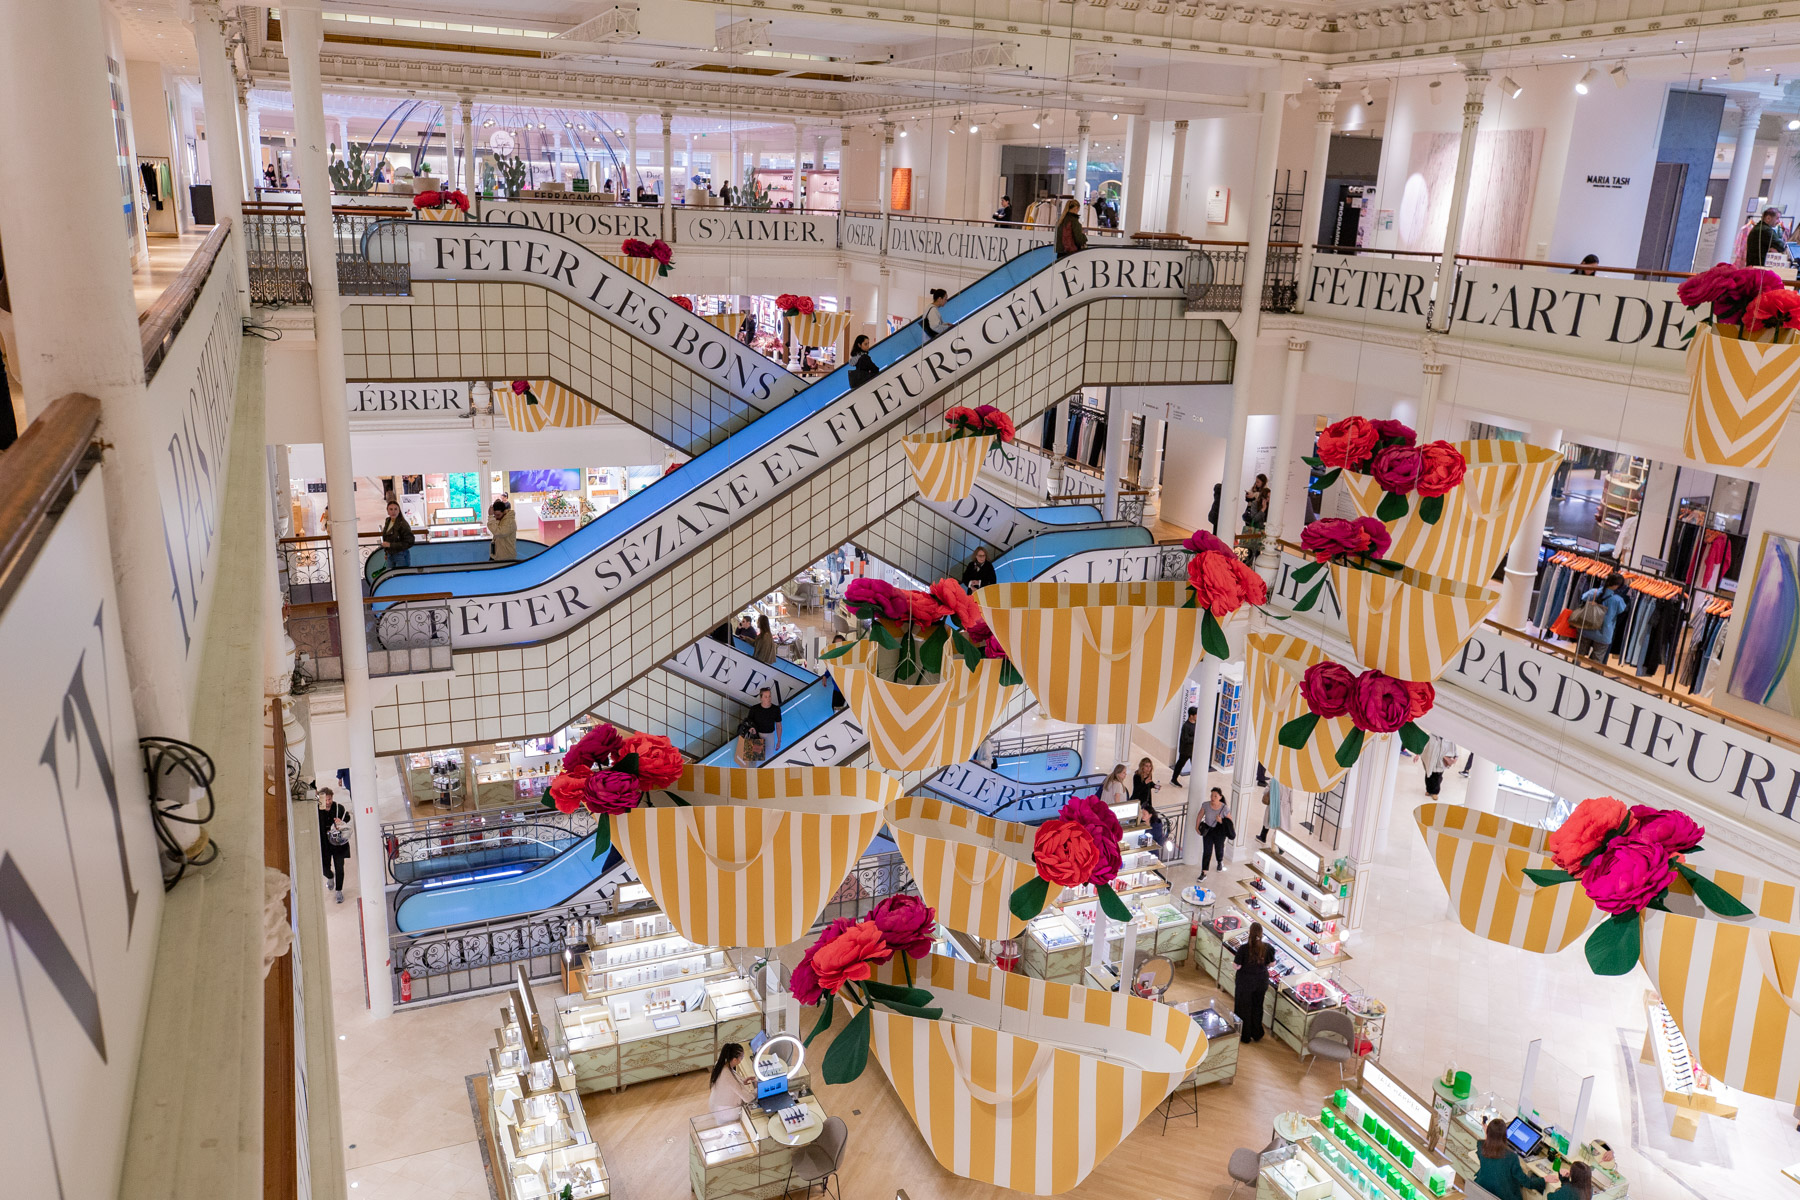 Le Bon Marche Interior Spring Decorations
Things to do Saint Germain